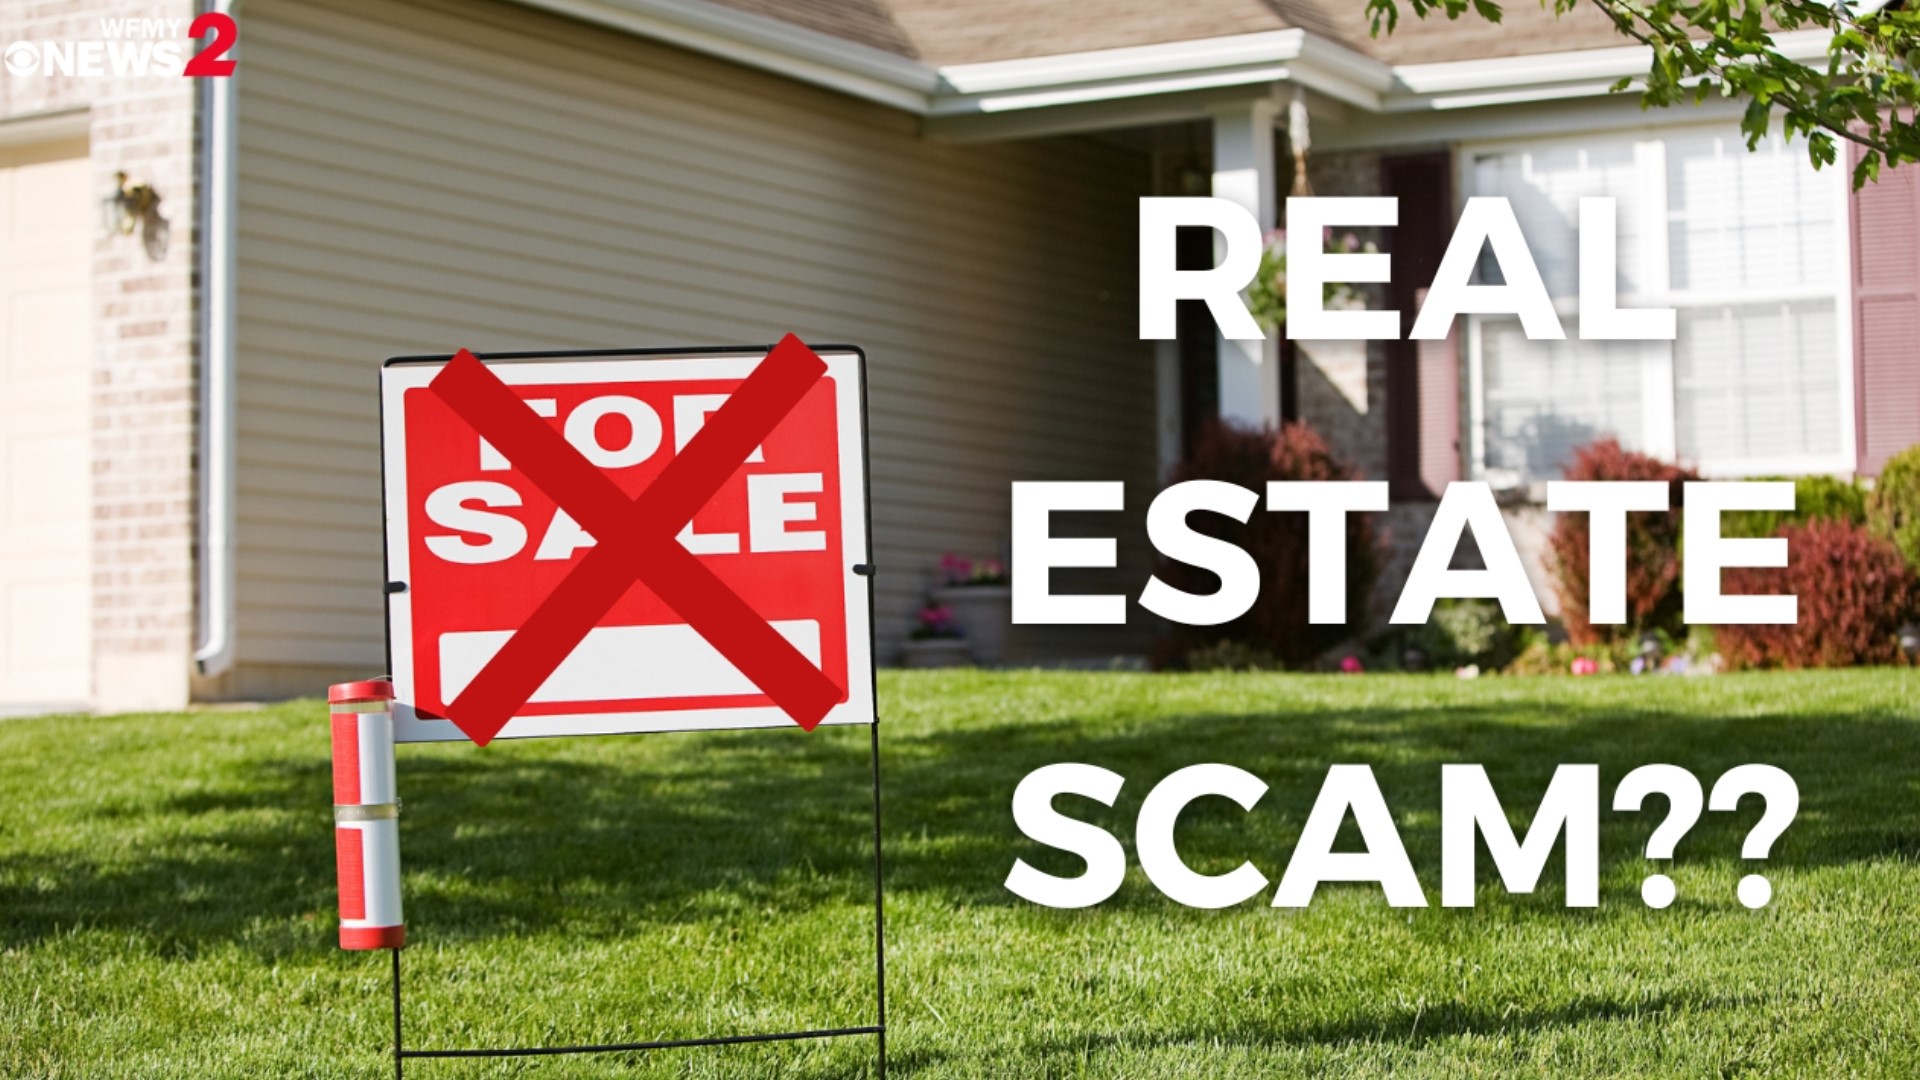 Real estate fraud is on the rise. Guilford County has a free way to protect yourself.